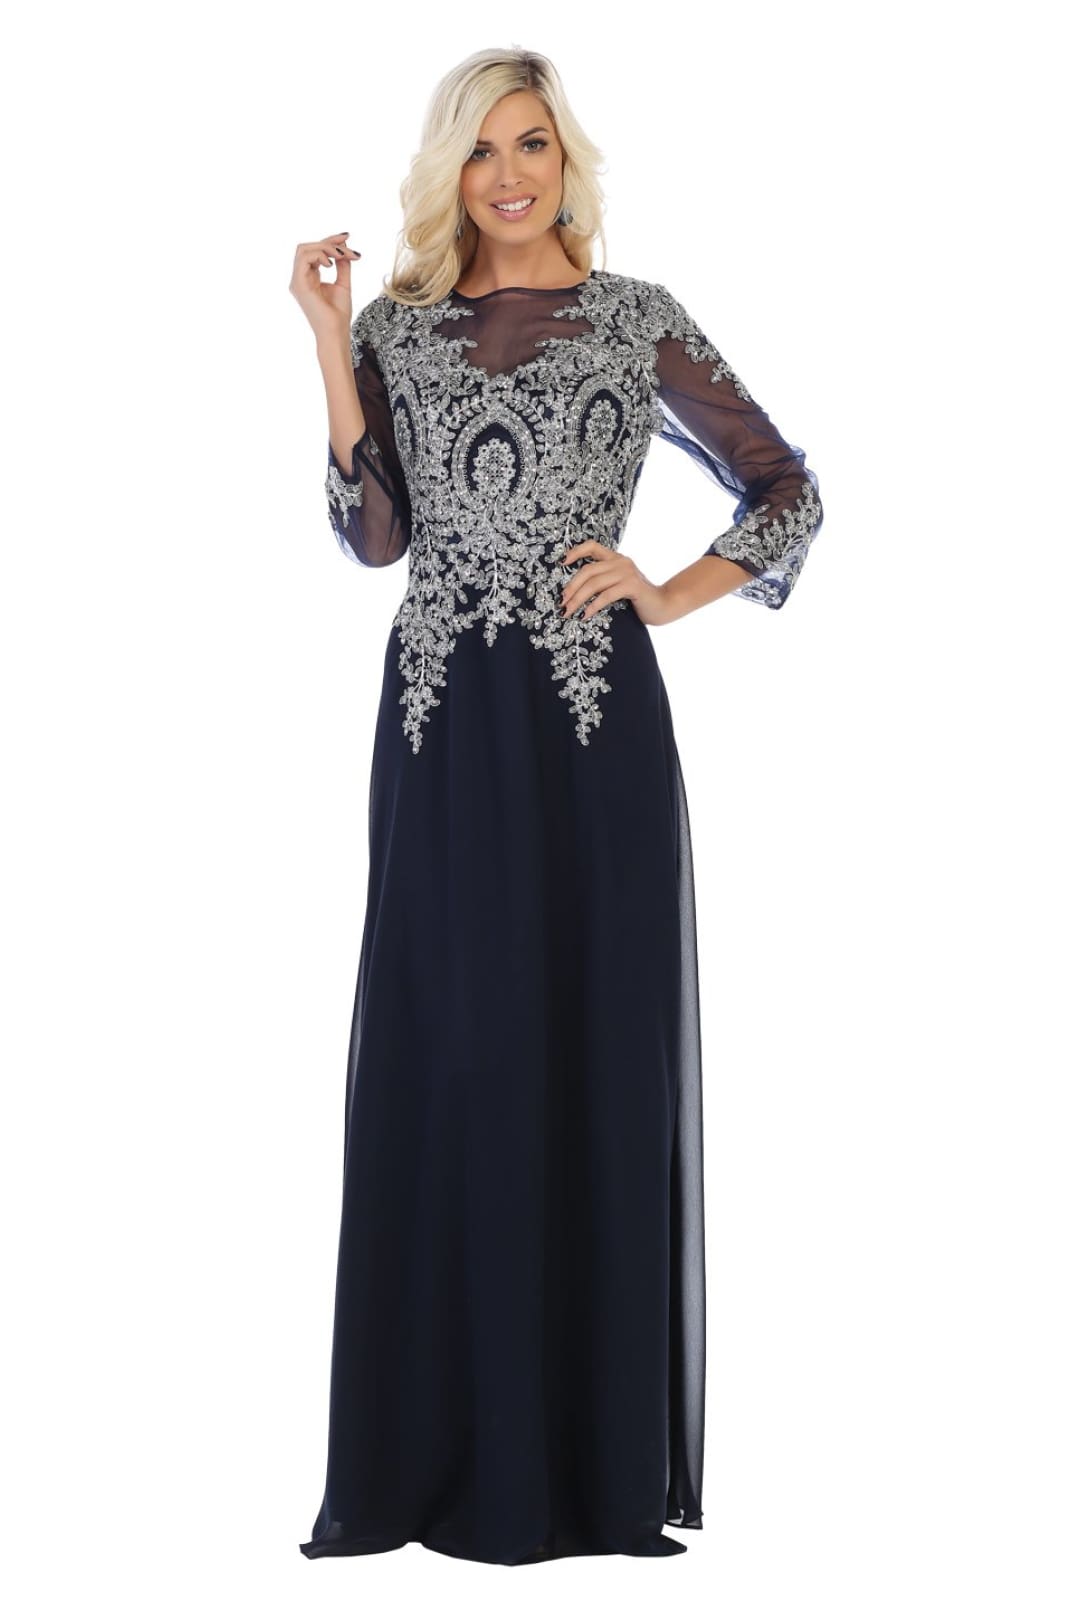 May Queen MQ1549 Embroidered Plus Size Mother Of The Bride Dress - Dress